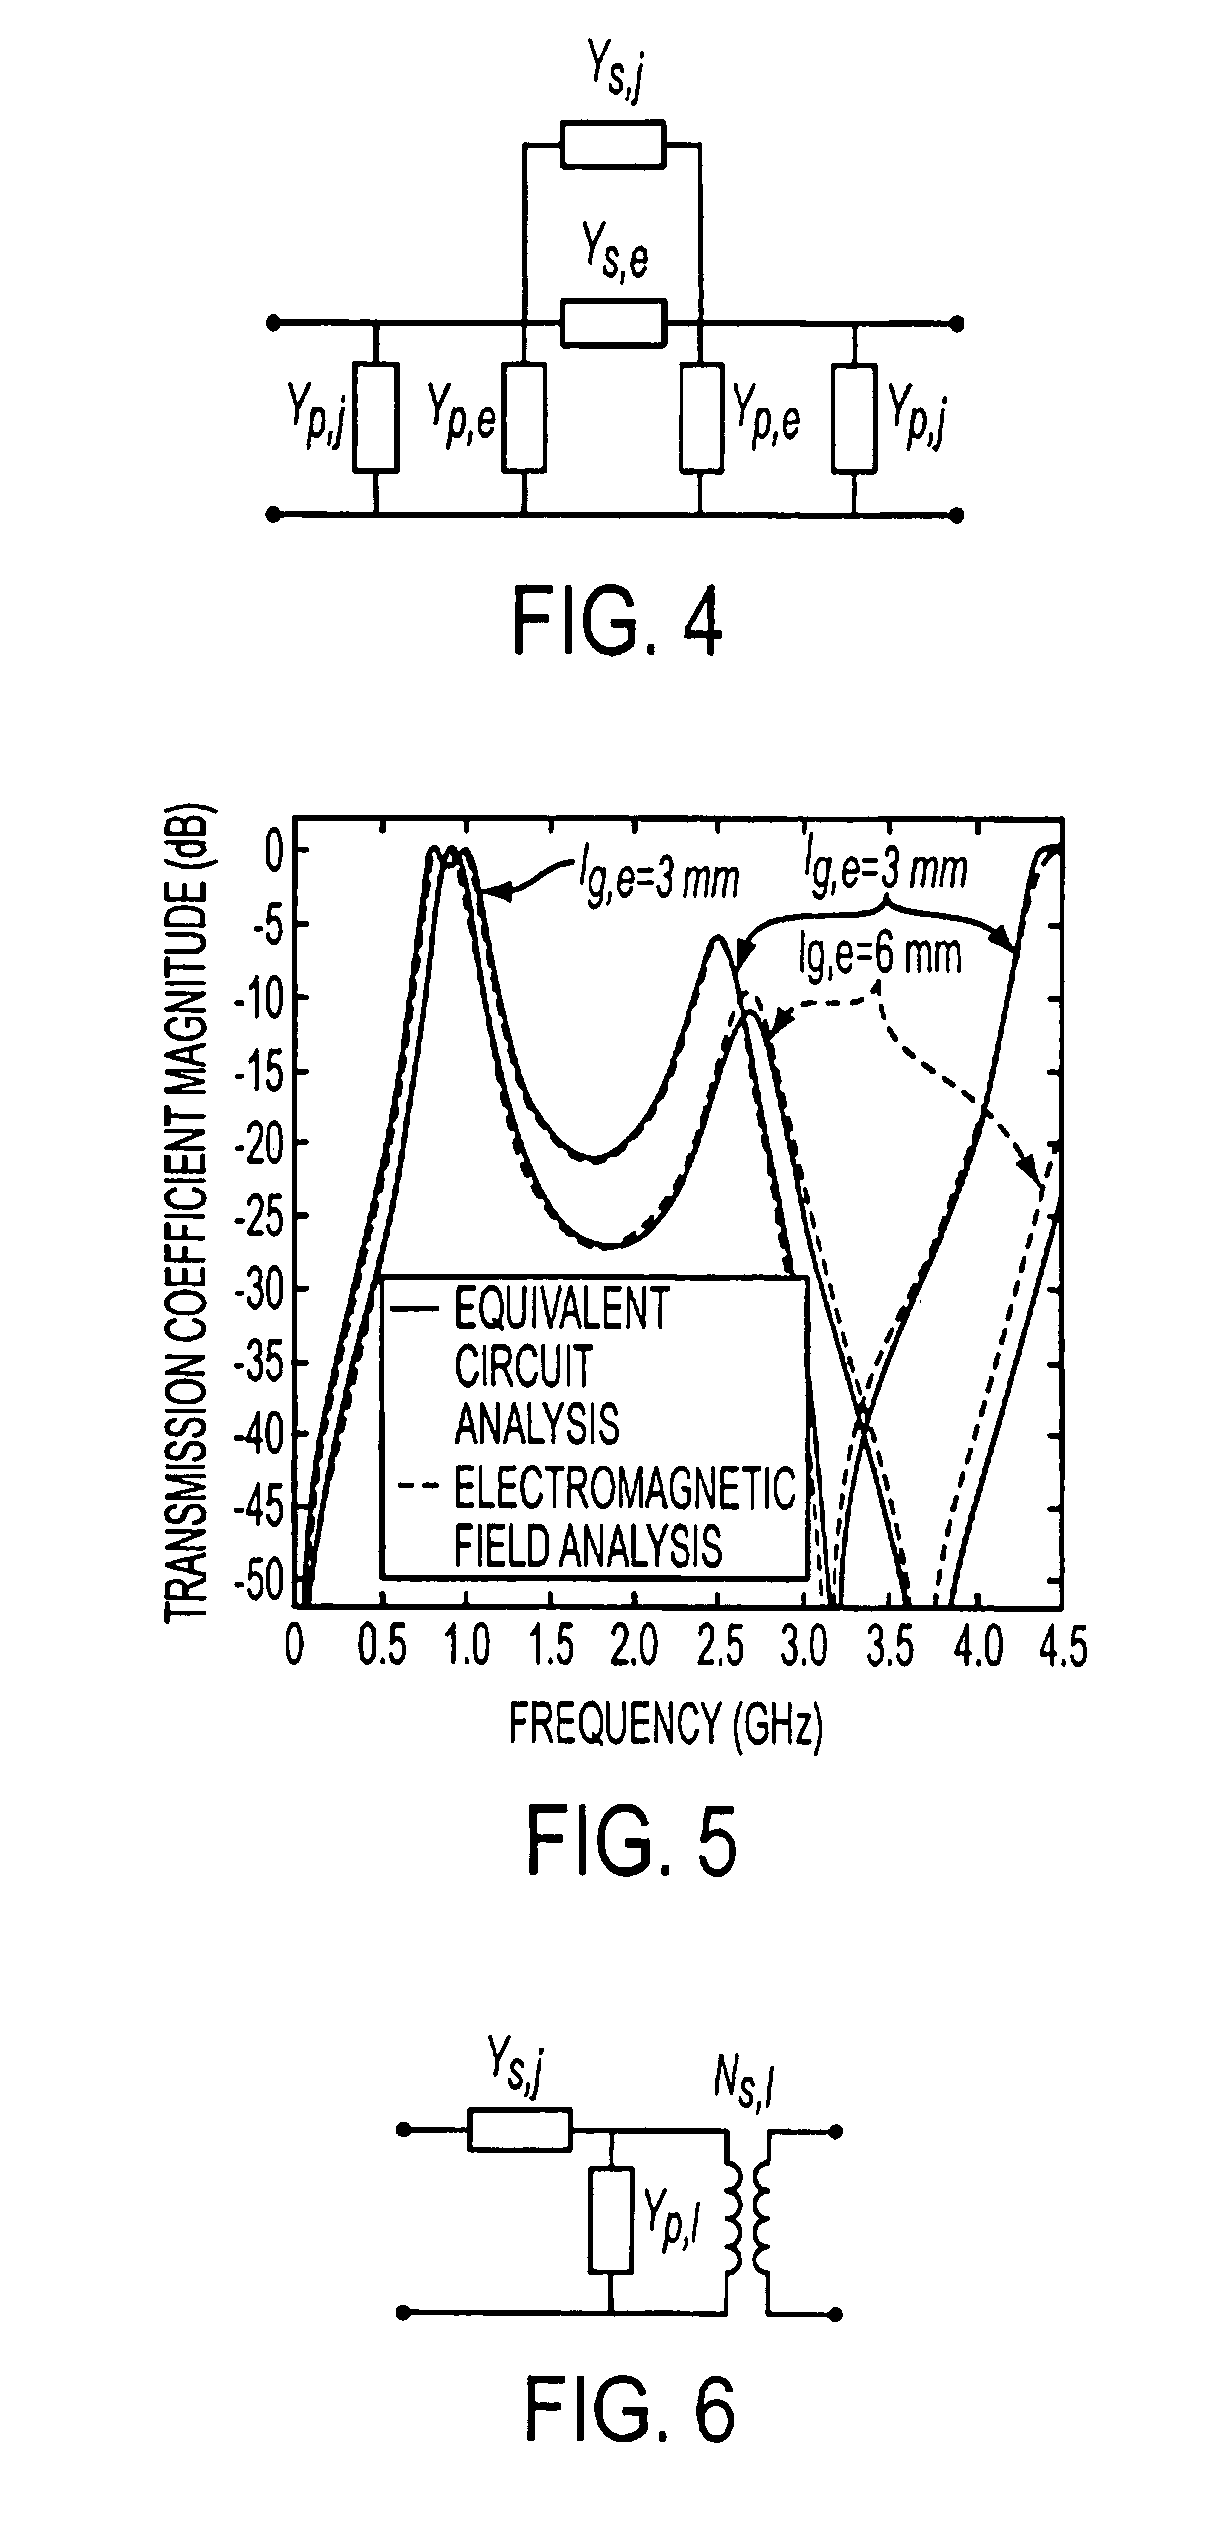 Ridge-waveguide filter and filter bank